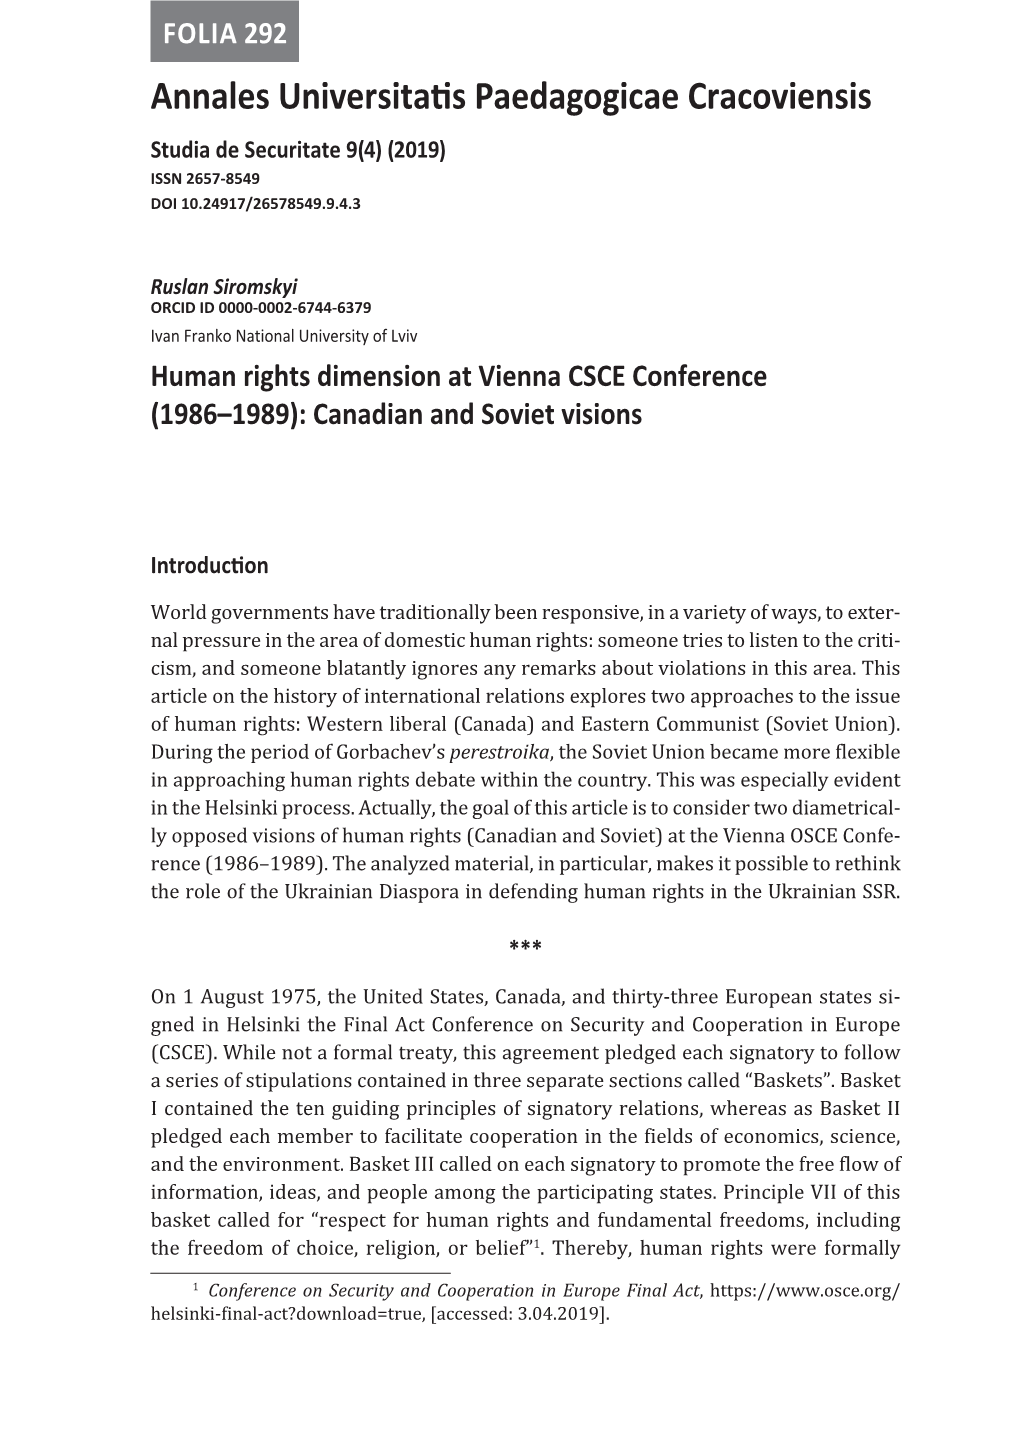 Human Rights Dimension at Vienna CSCE Conference (1986–1989): Canadian and Soviet Visions